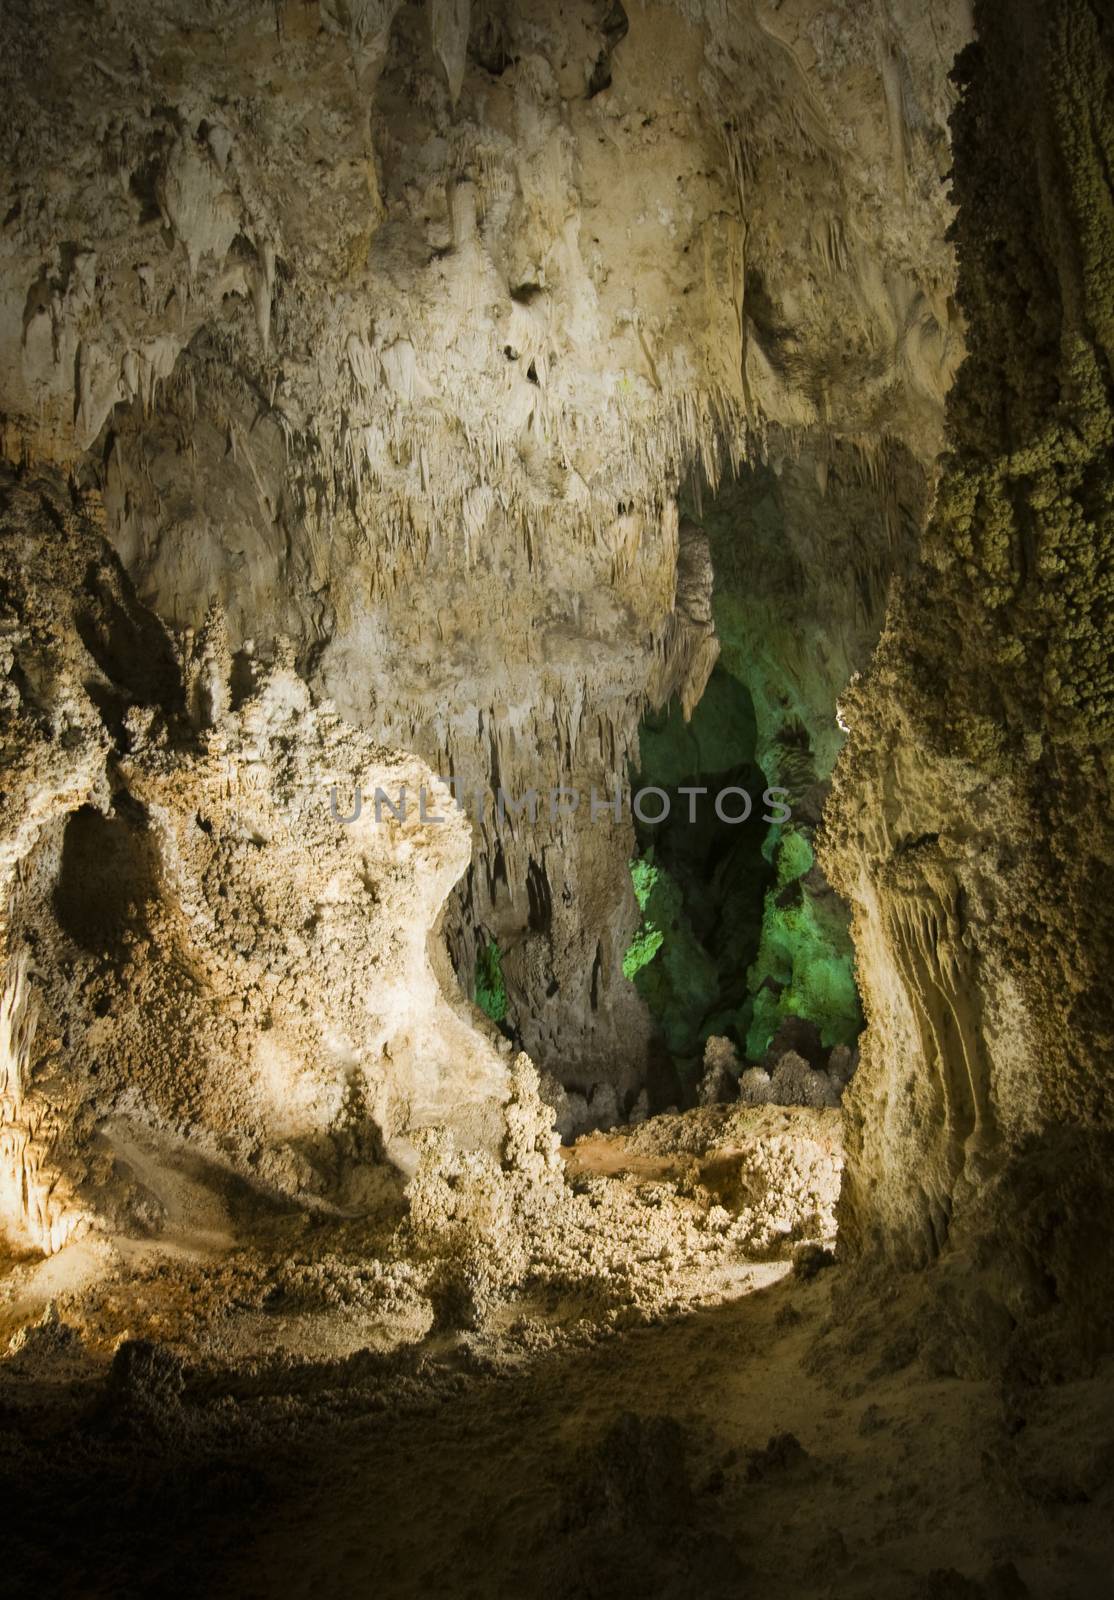 The Big Room in Carlsbad Caverns, NM